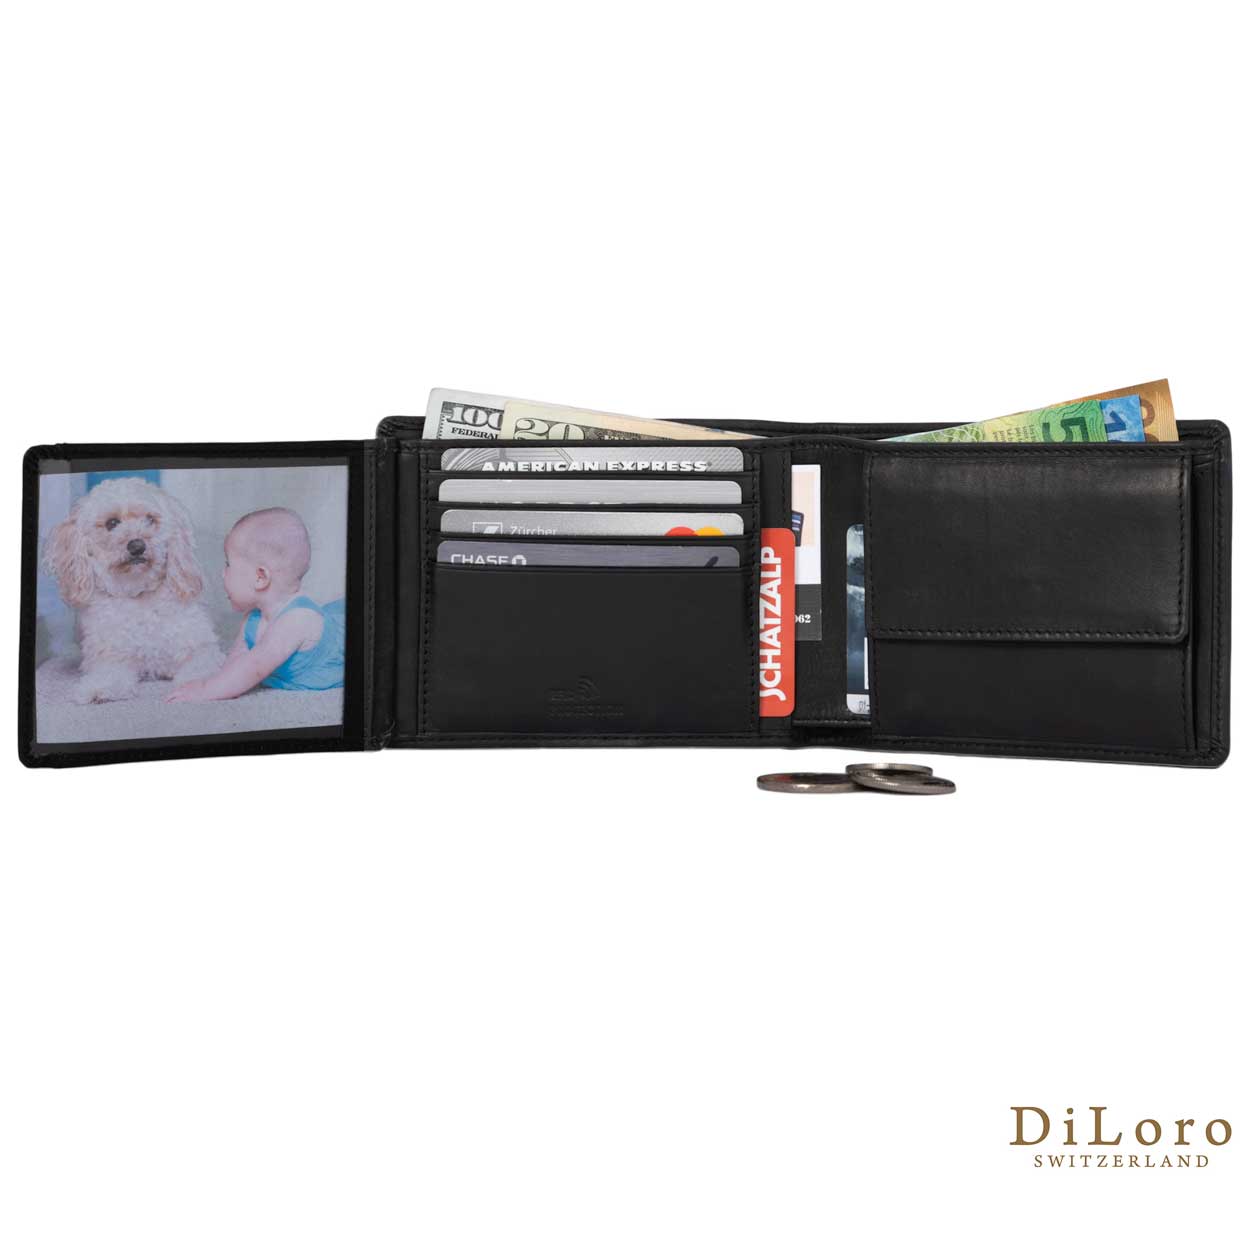 DiLoro Men's Leather Bifold Wallet with Flip ID, Coin Wallet and RFID Blocking Technology - Inside, Full Open View